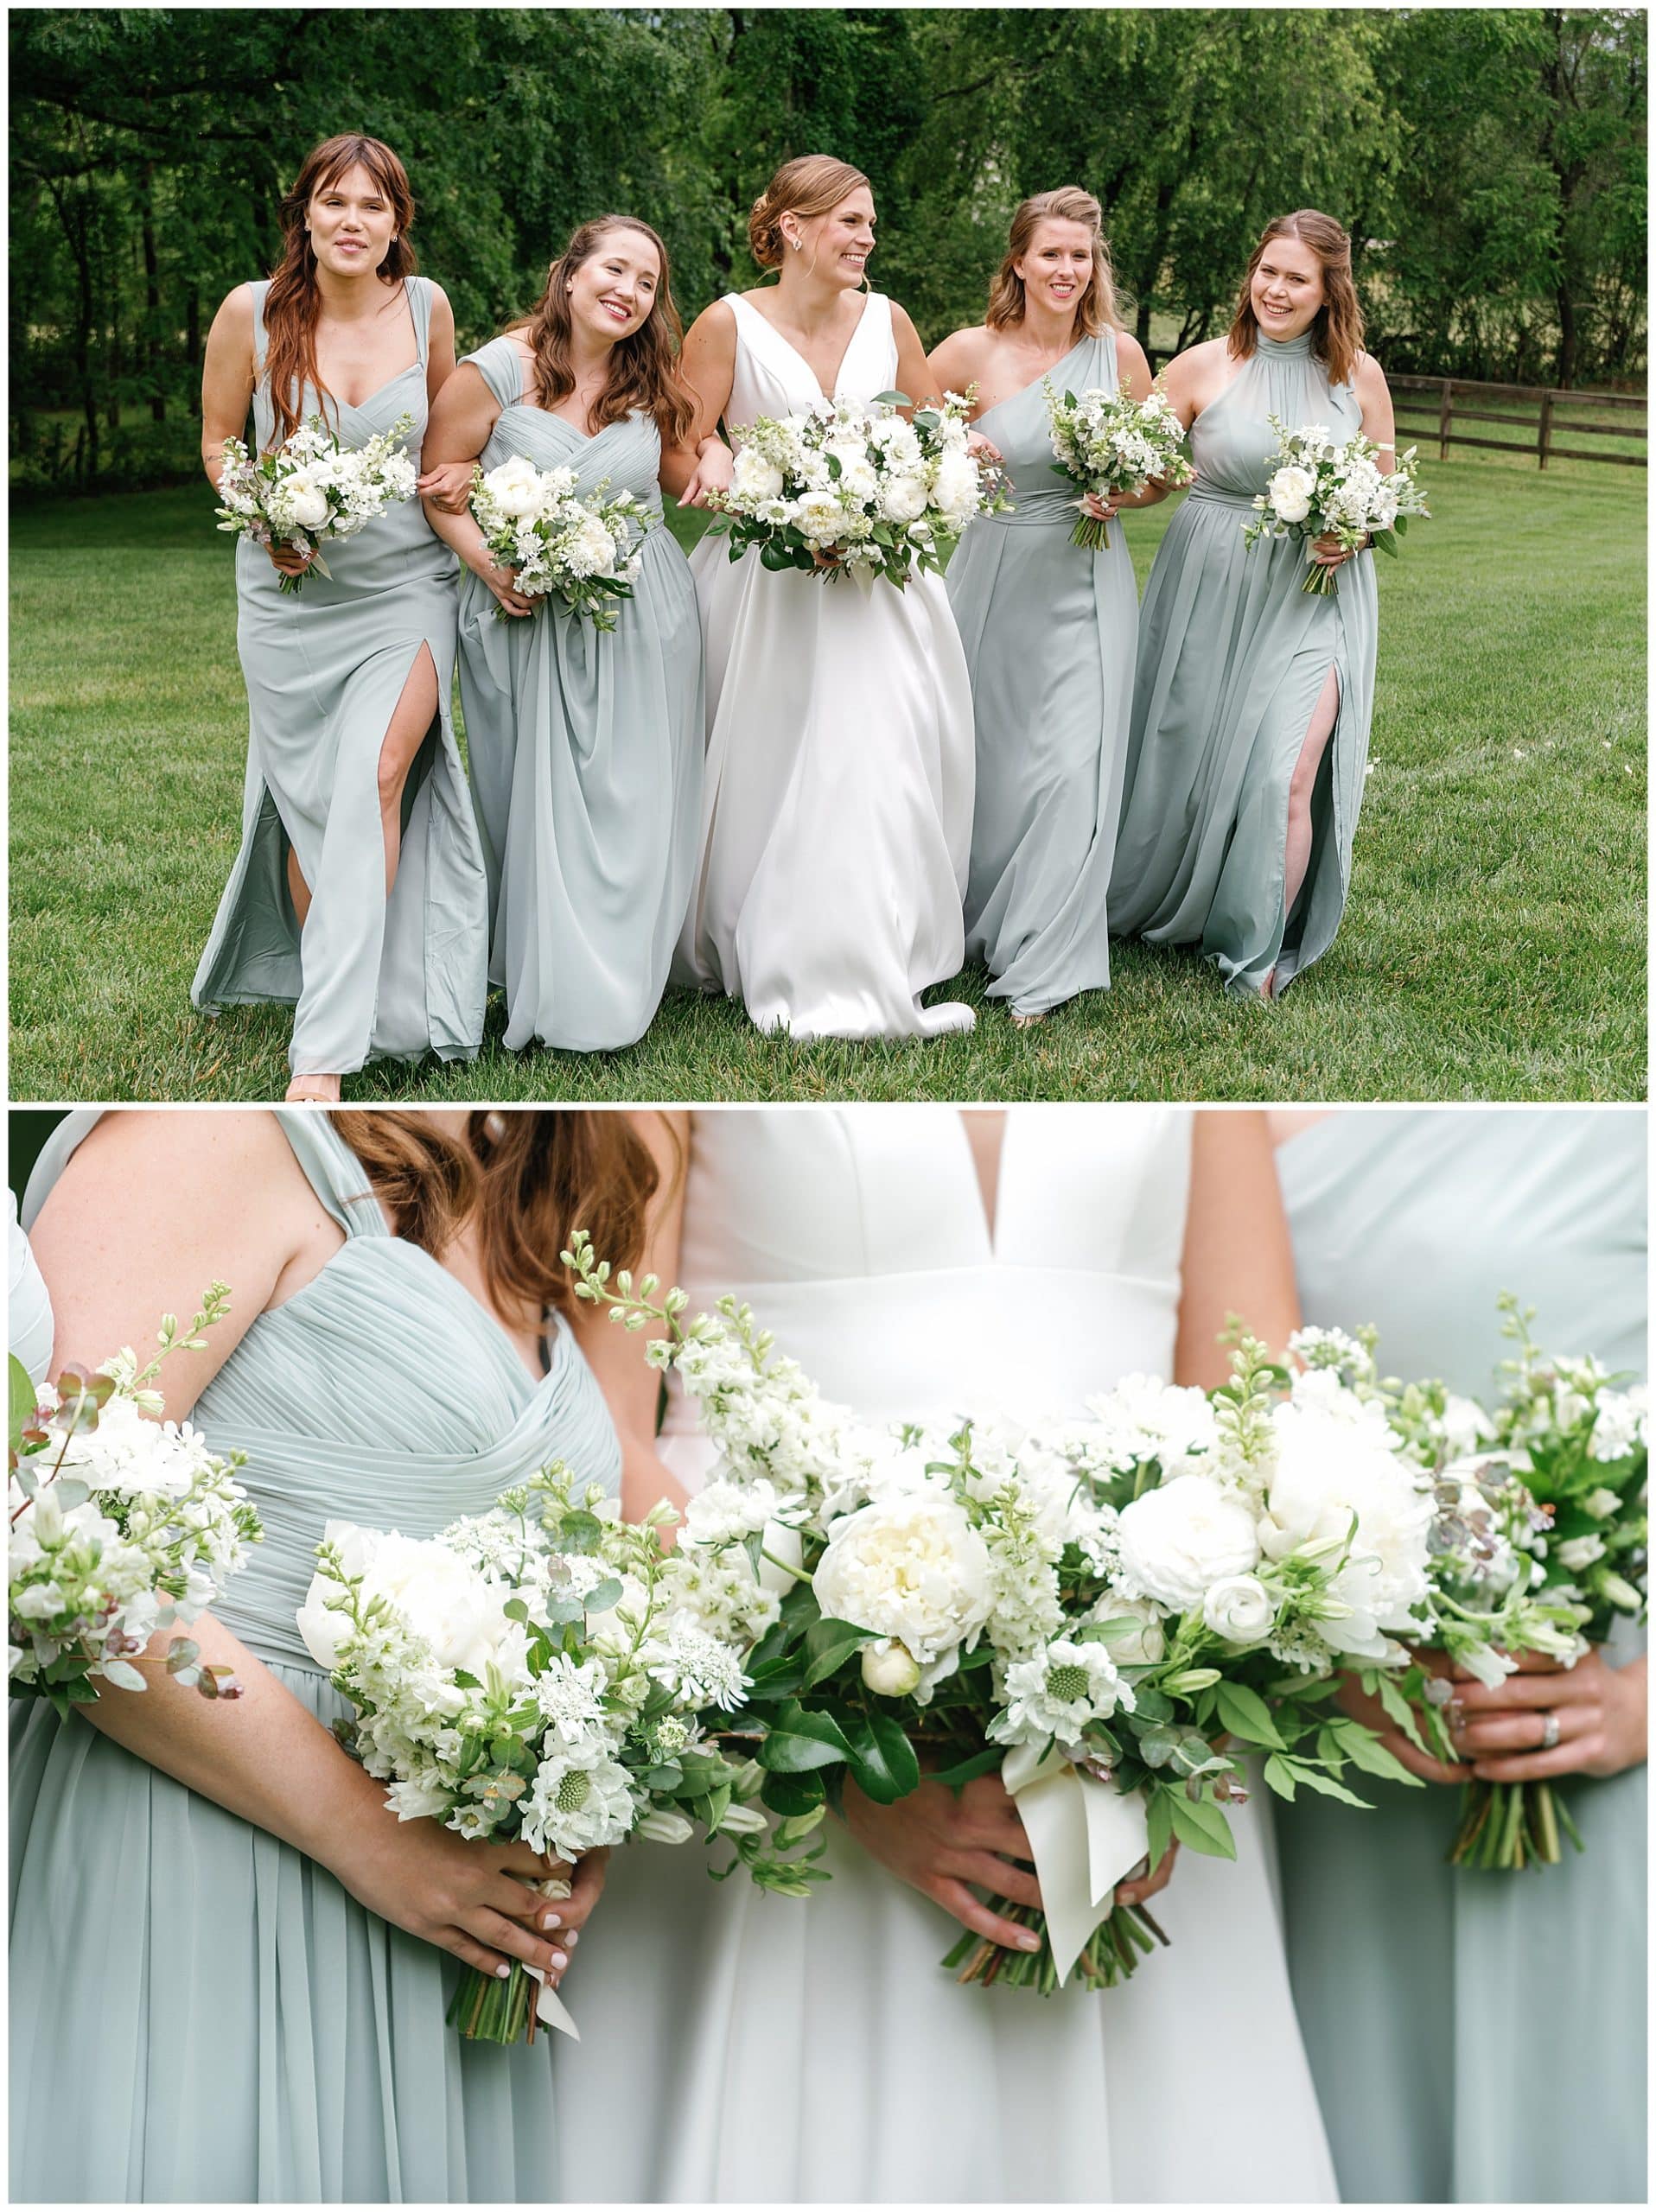 Bride and bridemaids lock arm and walk together while holding bouquets of white and green